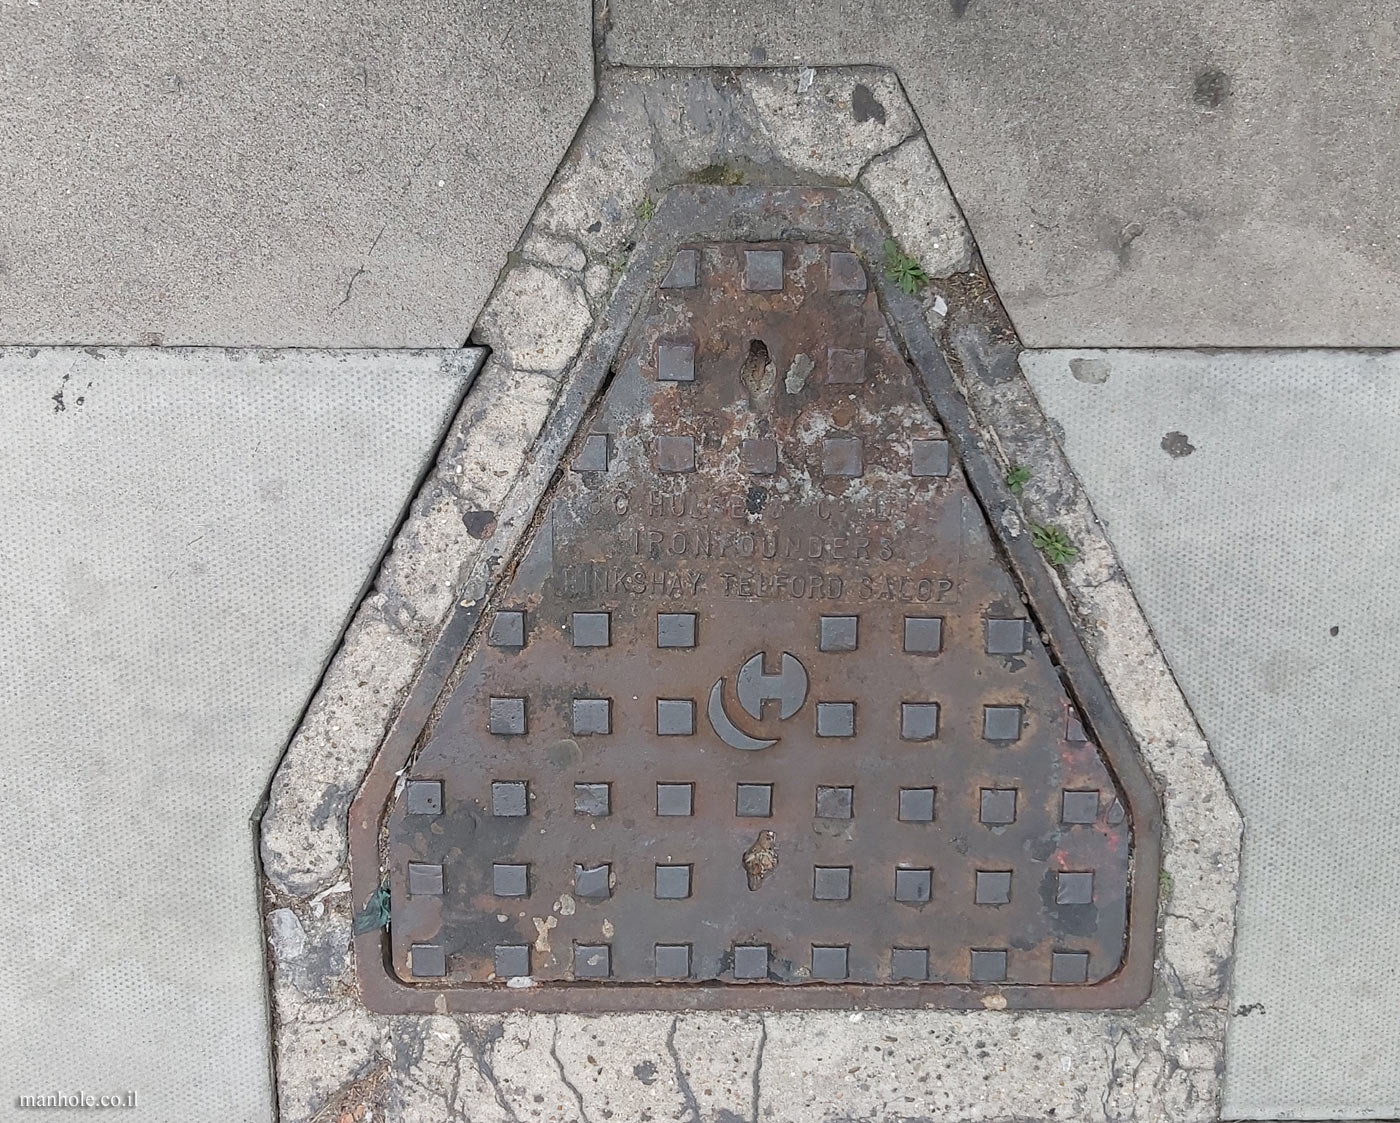 London - Cover in the form of a triangle